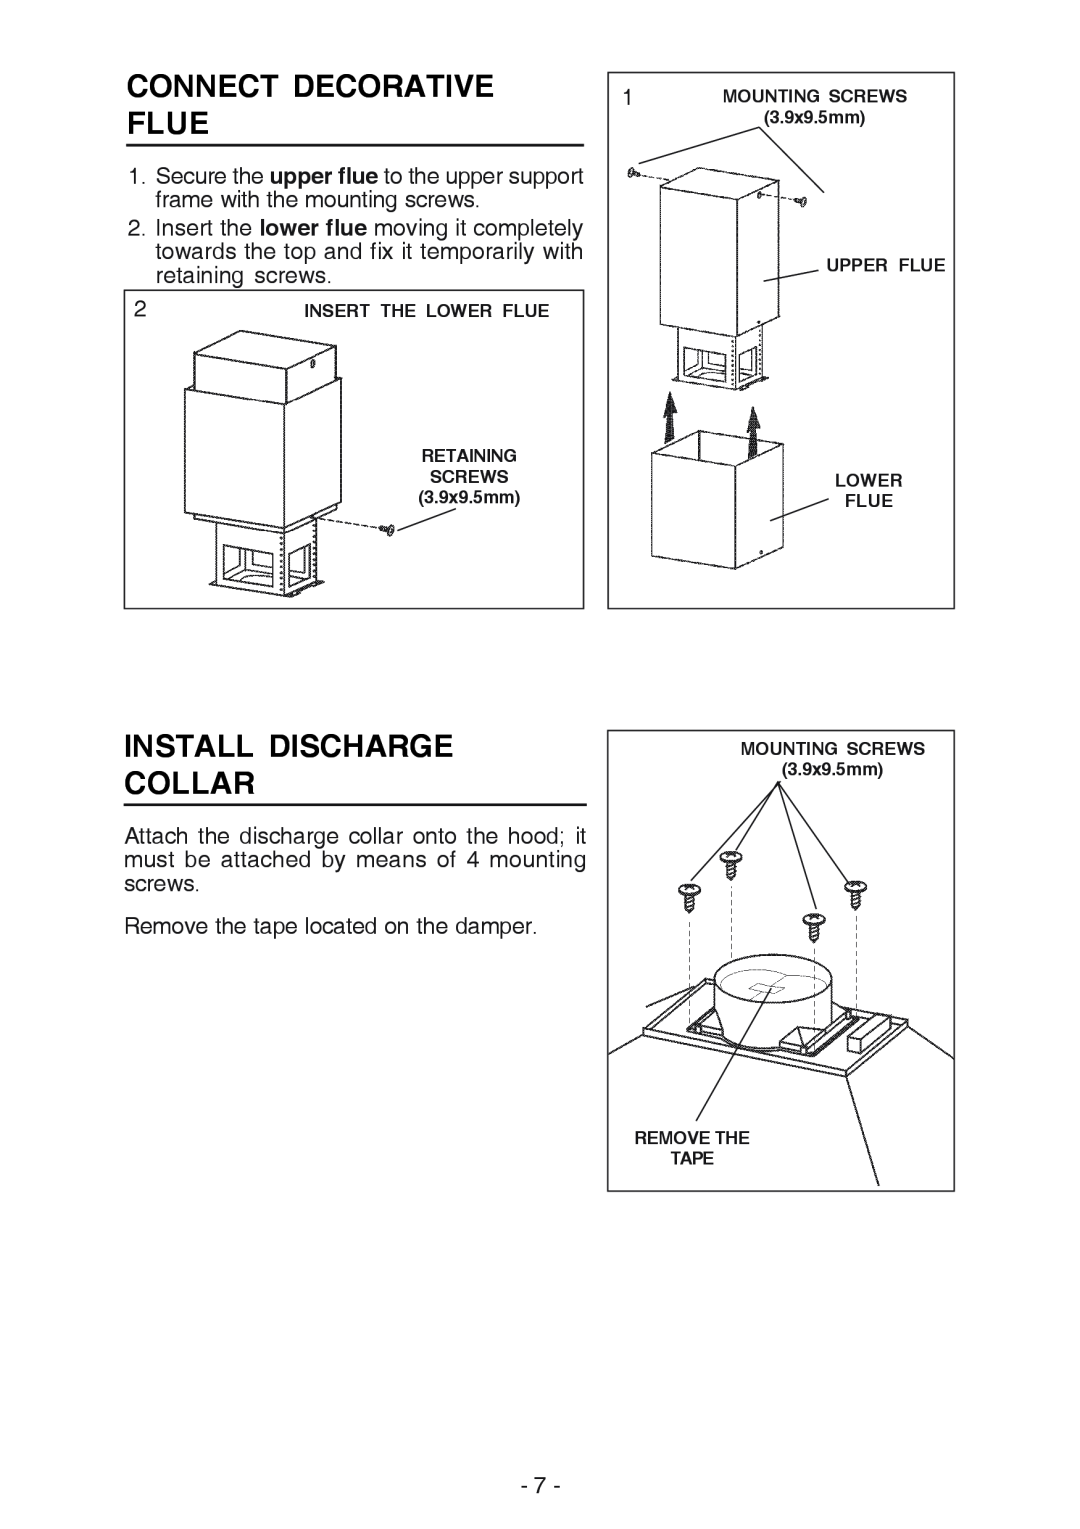 Broan 637004 manual Connect Decorative Flue, Install Discharge Collar 